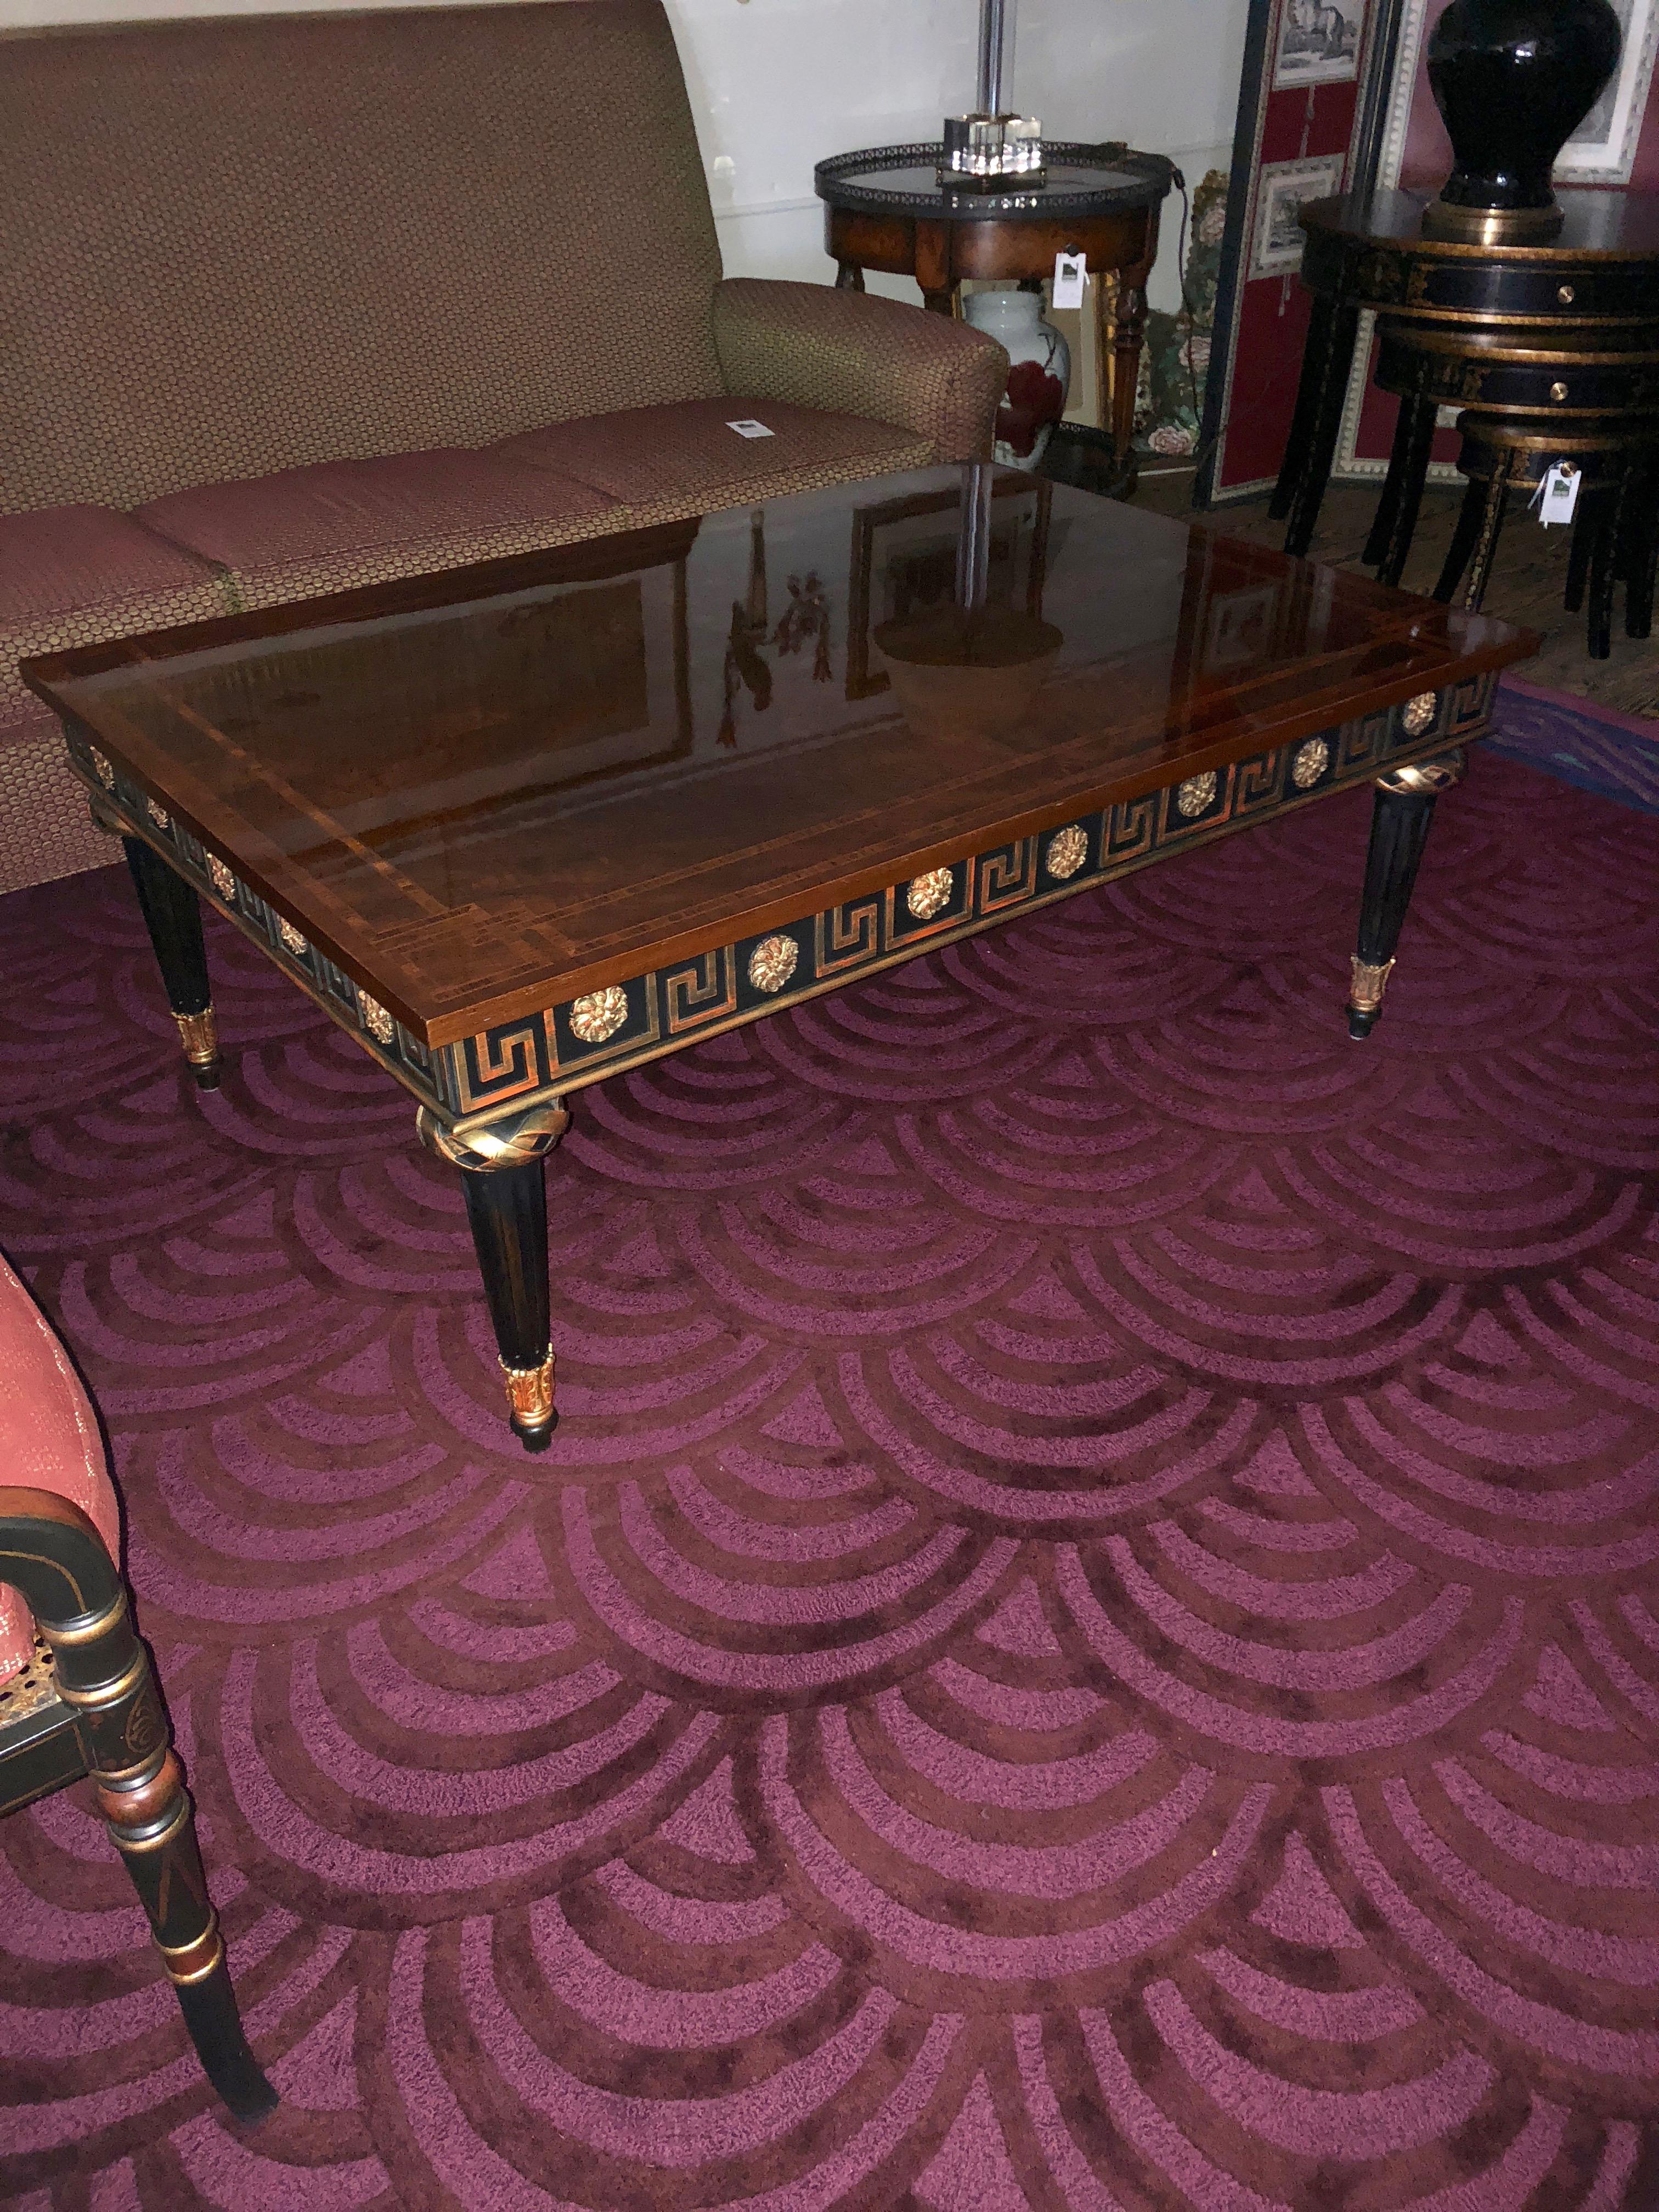 A sublimely rich Regency style bookmatched flame mahogany coffee table by John Widdicomb having magnificent satinwood inlay on top and ebonized apron and legs with gilded Greek key motife and fancy embellishments.